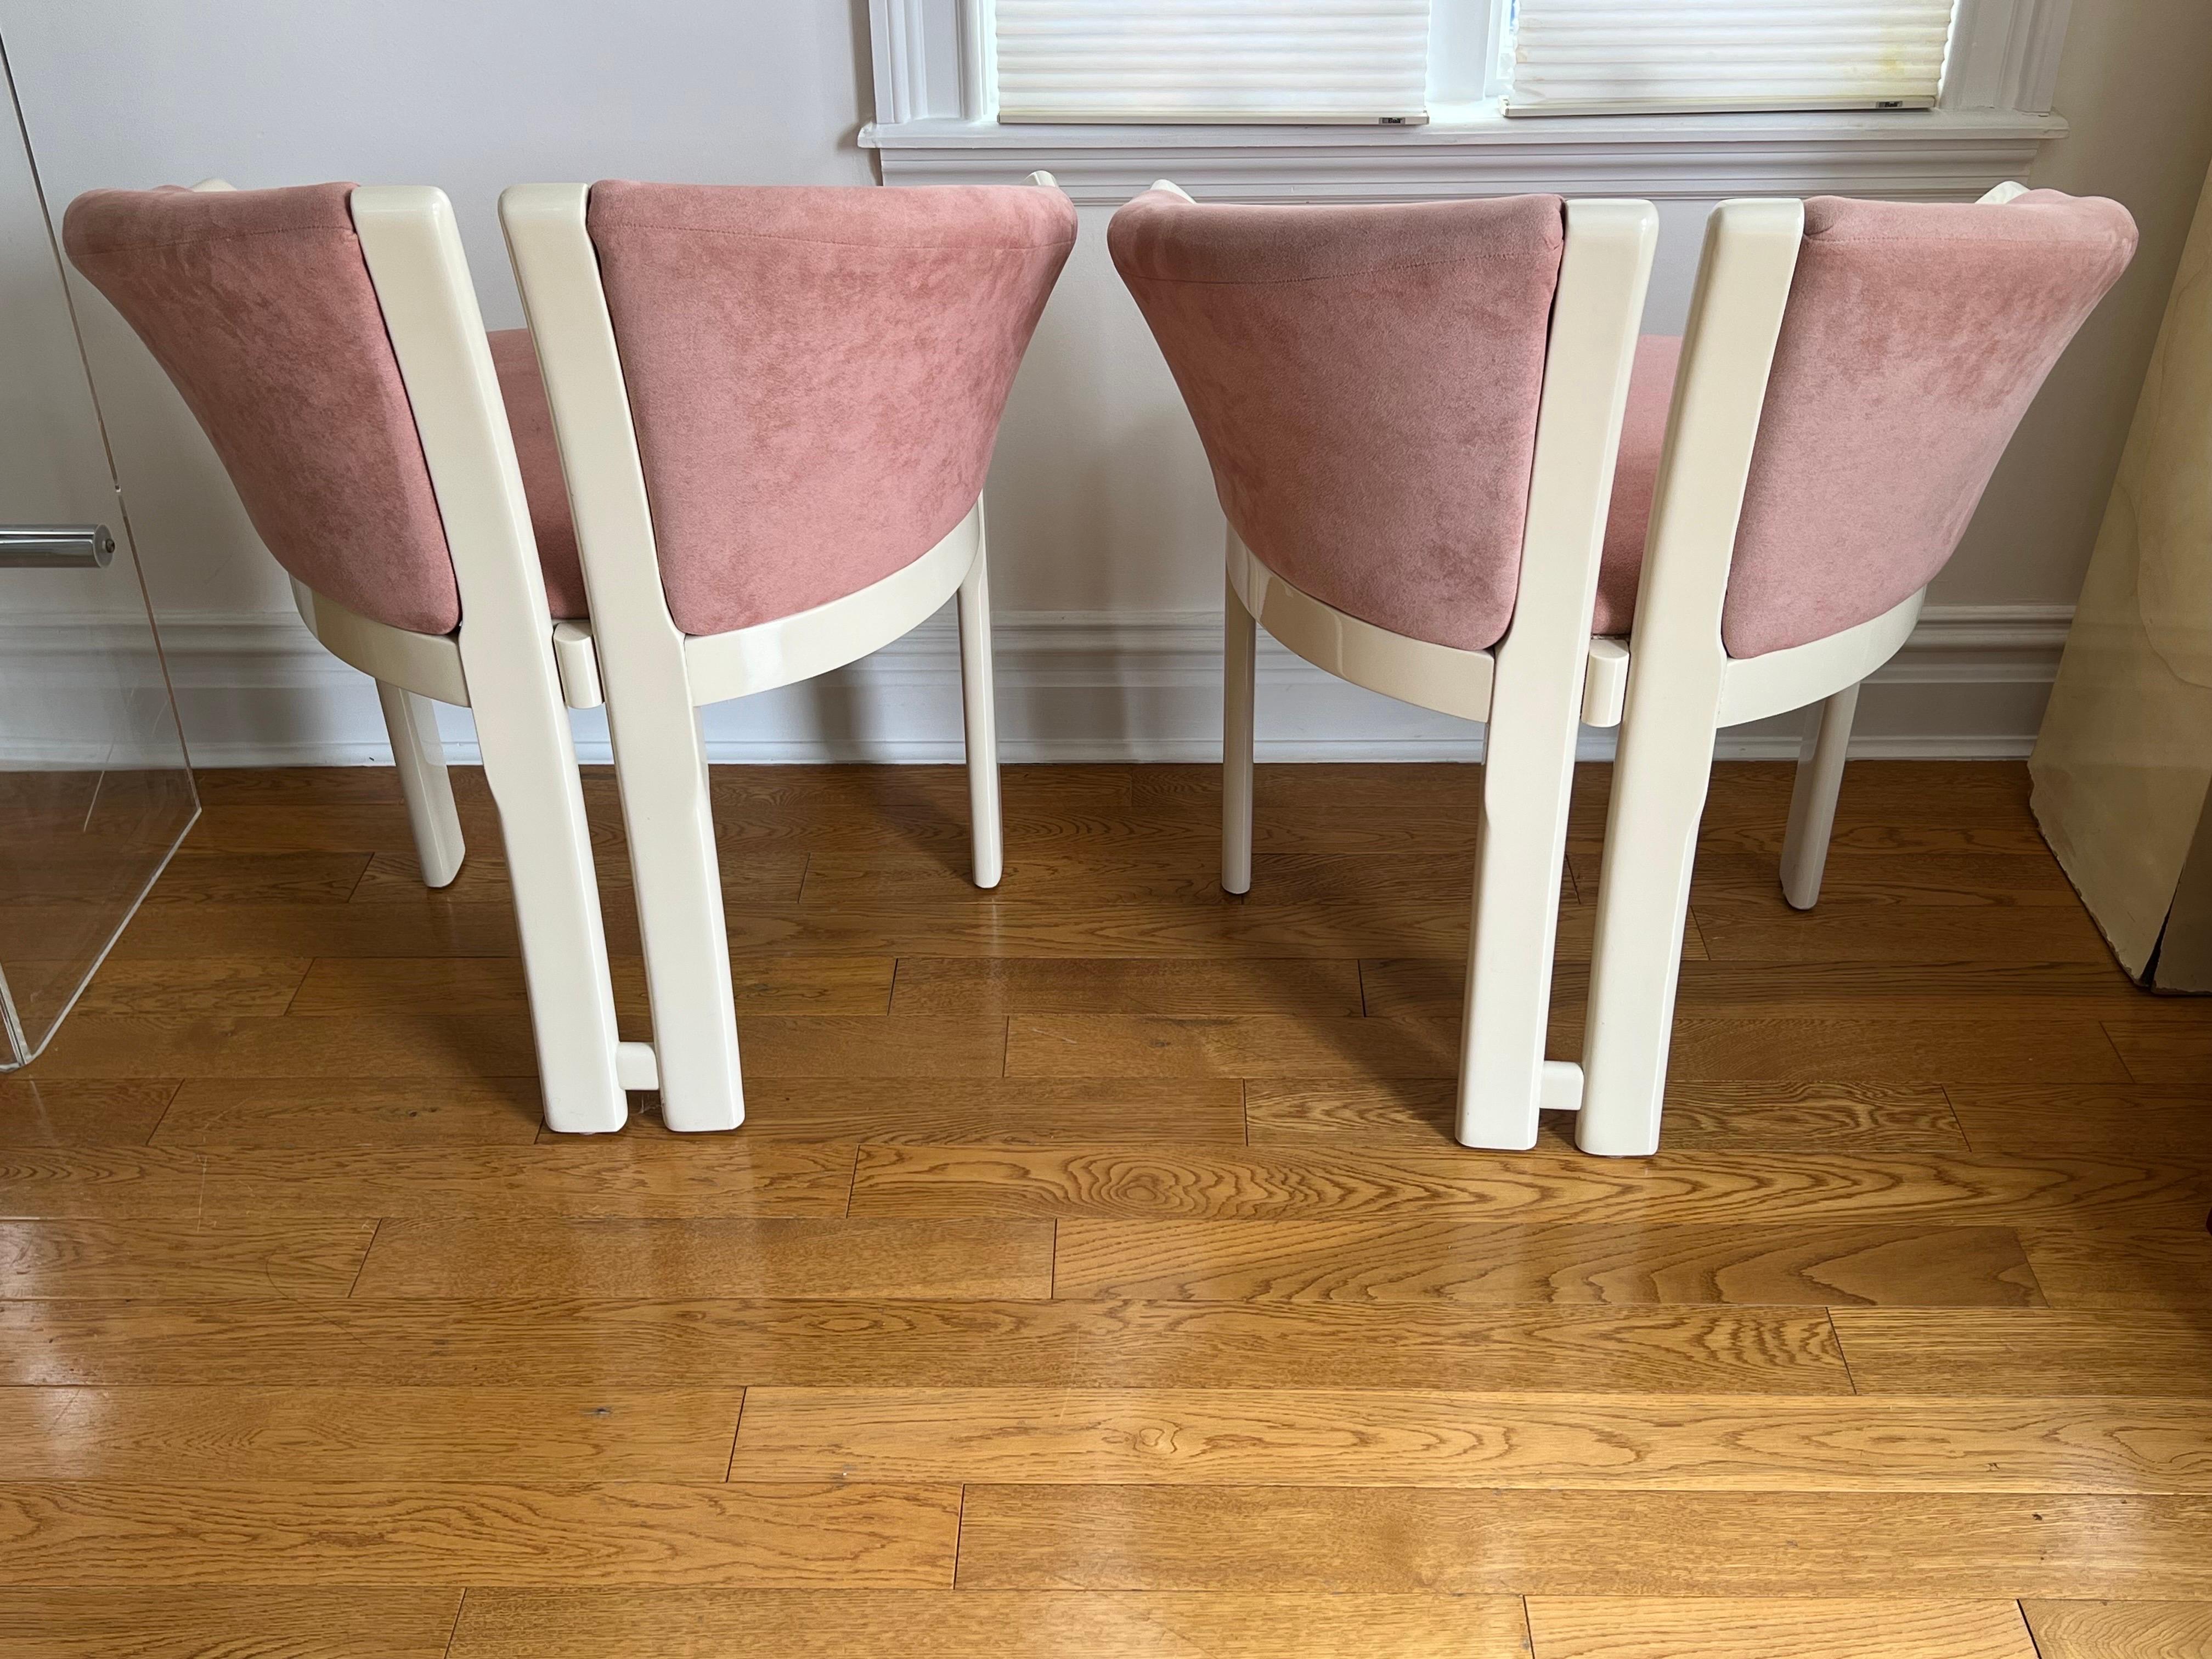 1980 PostModern Lacquer Pink Velvet Club Chairs - a Pair

Some watermarks on one of the pink velvet chairs. Overall good condition but does show signs of wear.

Please check all of the photos for the condition, photos are a part of the description